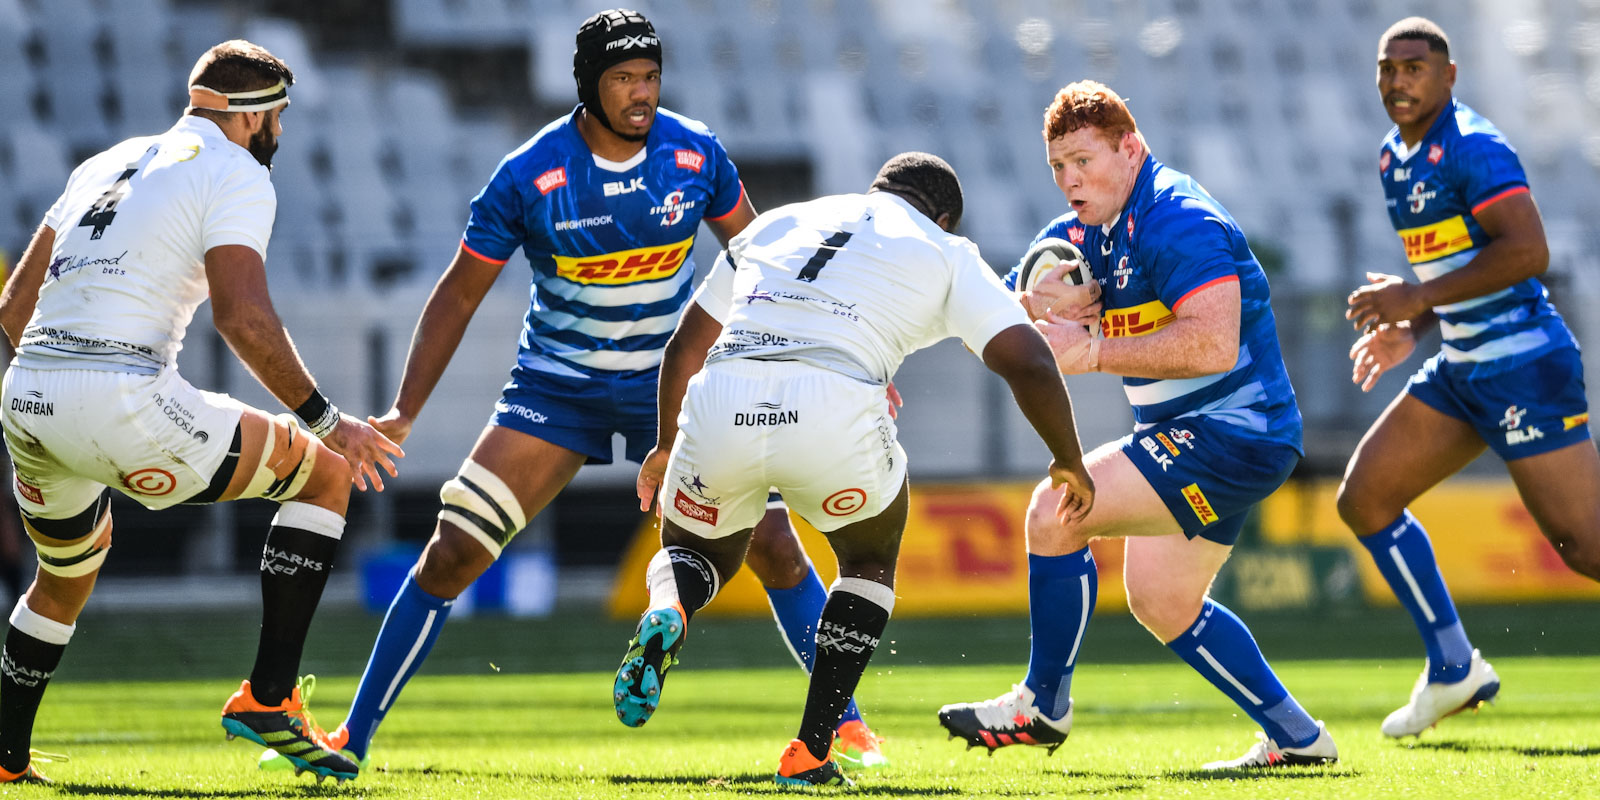 Steven Kitshoff braces for contact in the DHL Stormers' opening clash last weekend against the Cell C Sharks.